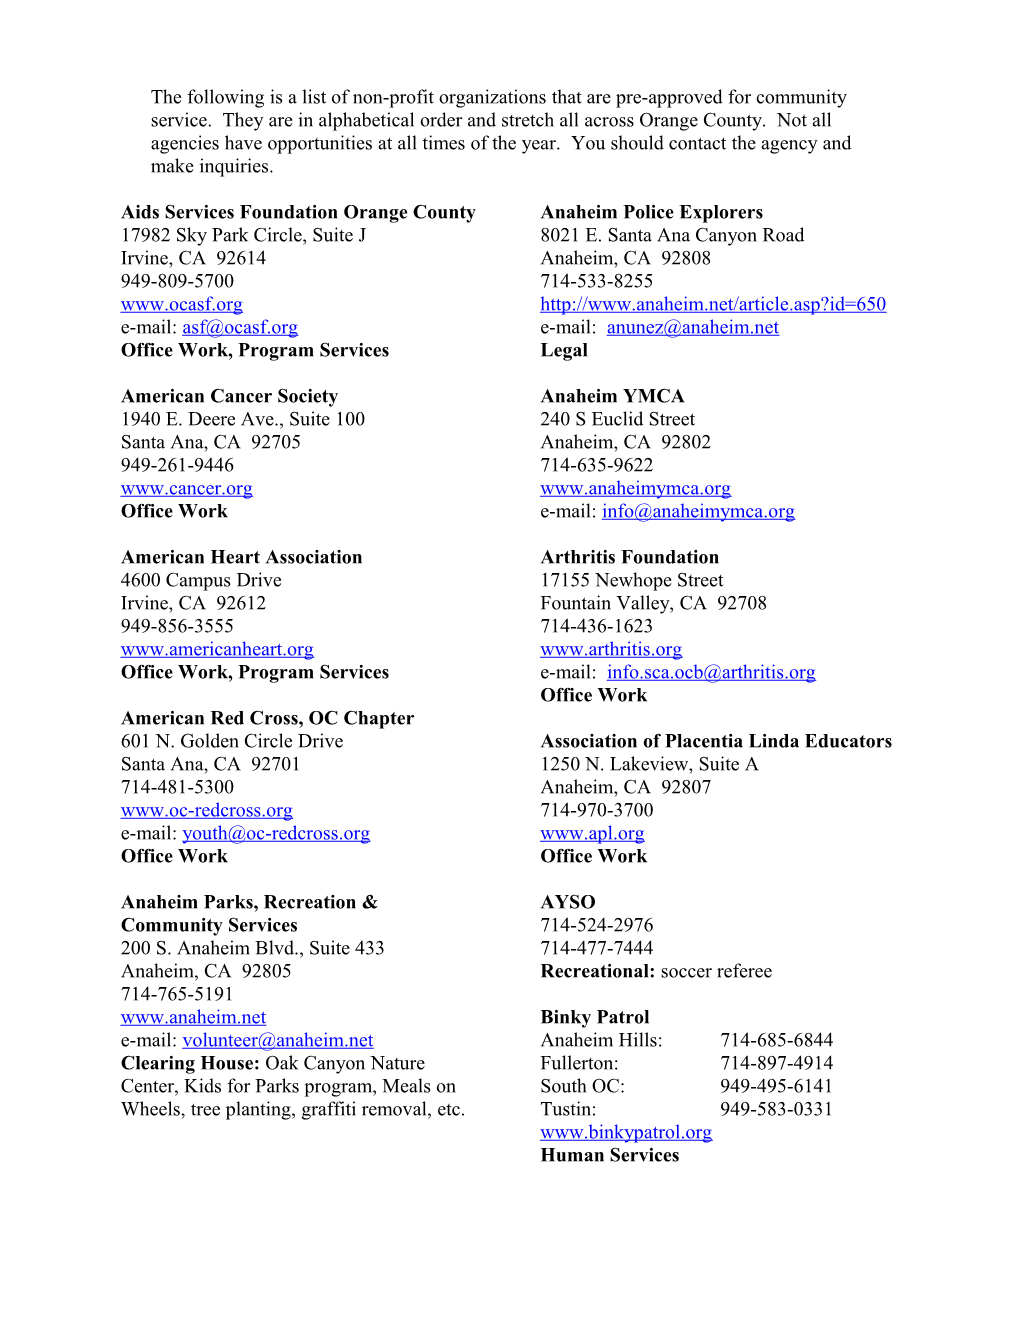 The Following Is a List of Non-Profit Organizations That Are Pre-Approved for Community Service